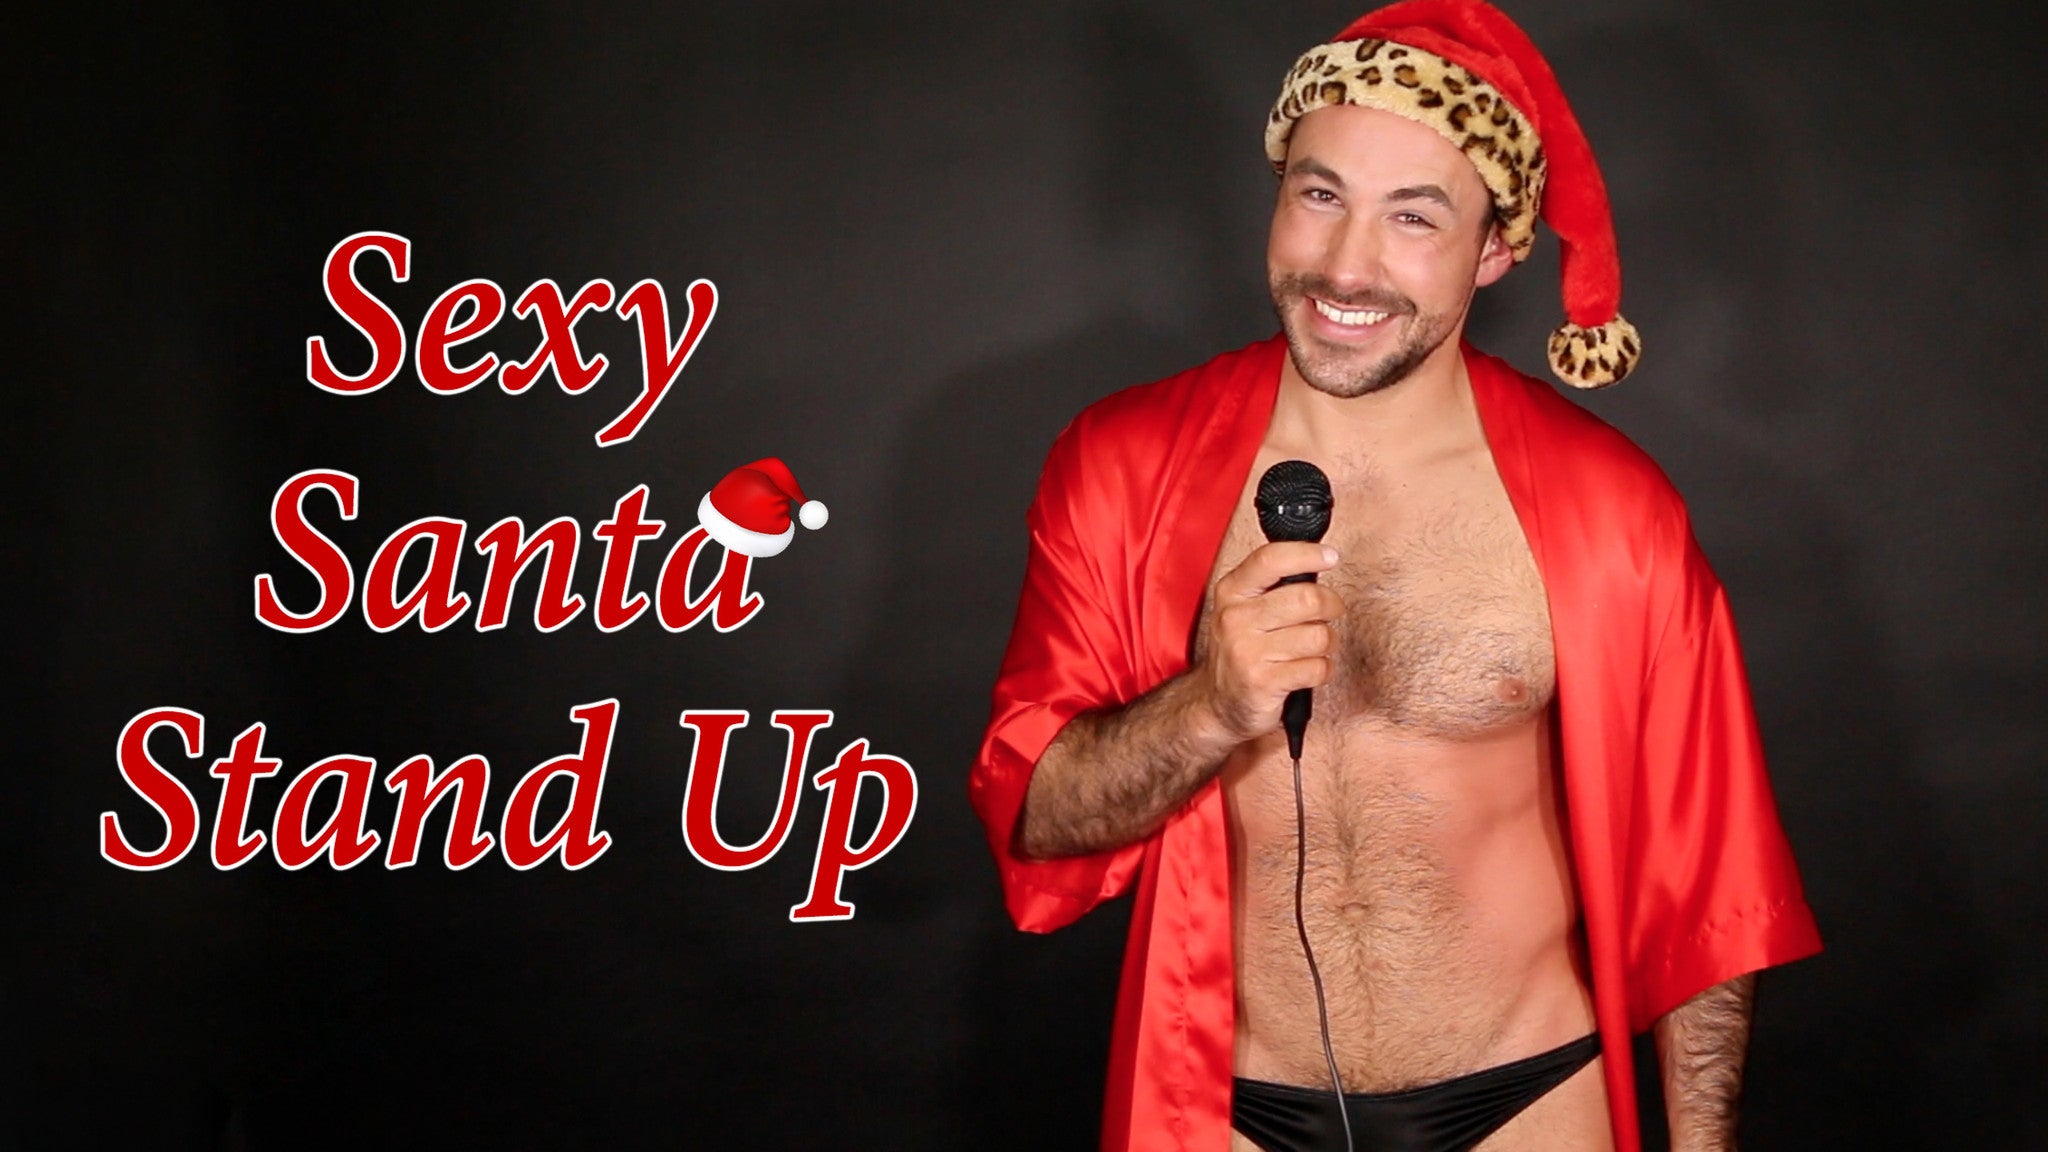 It's all about SEXY SANTA STAND UP